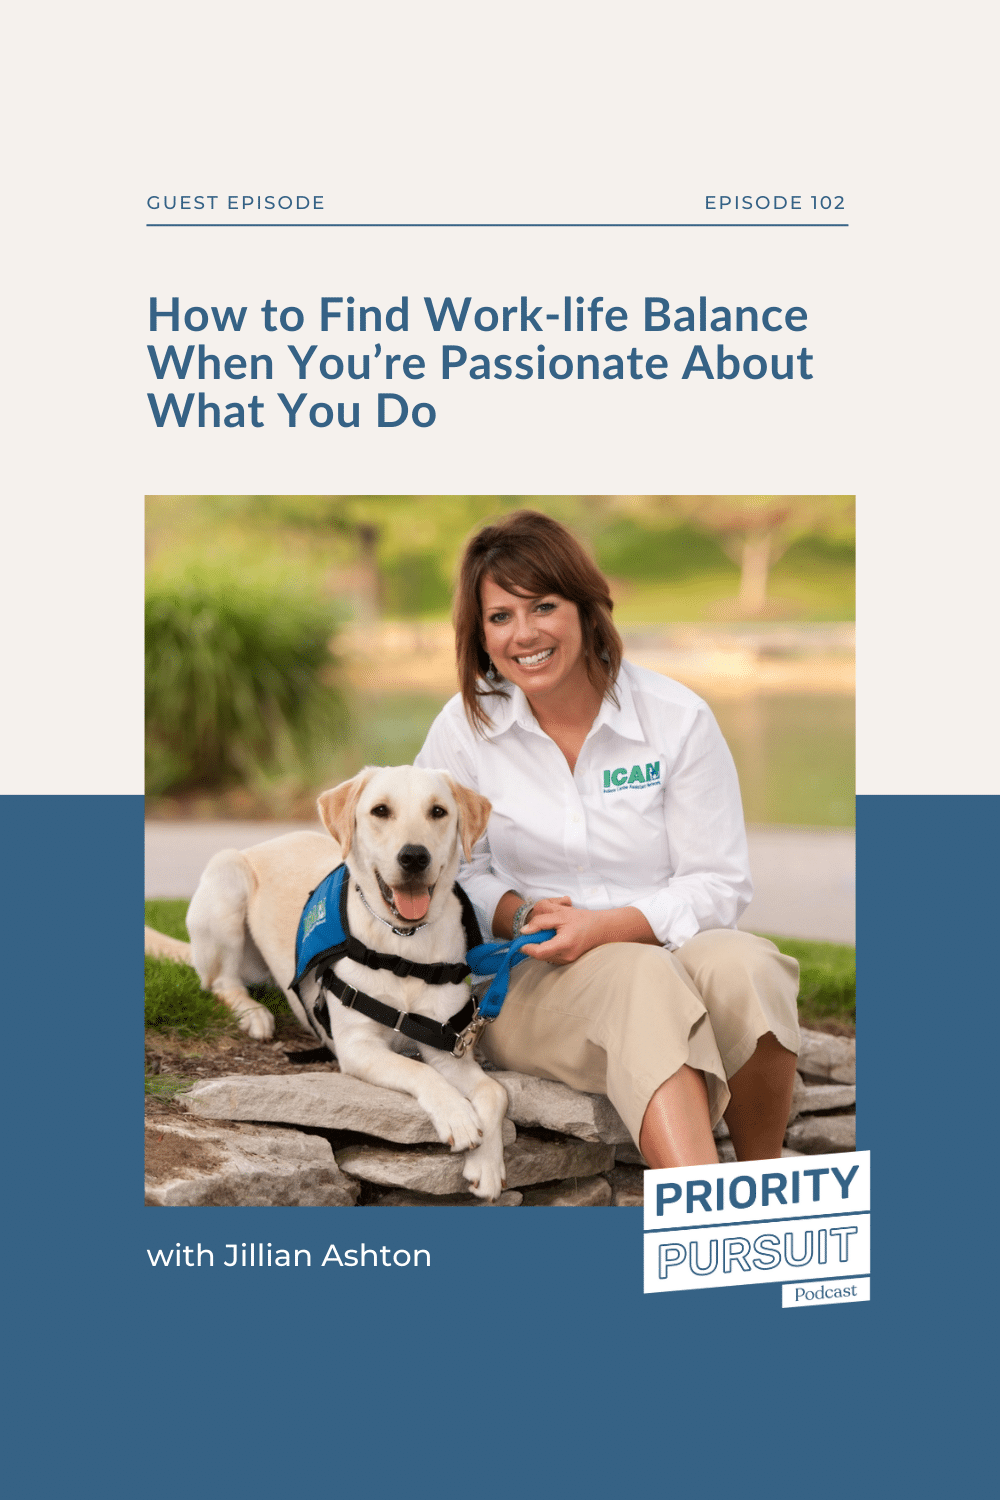 How to find work-life balance when you’re passionate about what you do with Jillian Ashton on the Priority Pursuit Podcast!